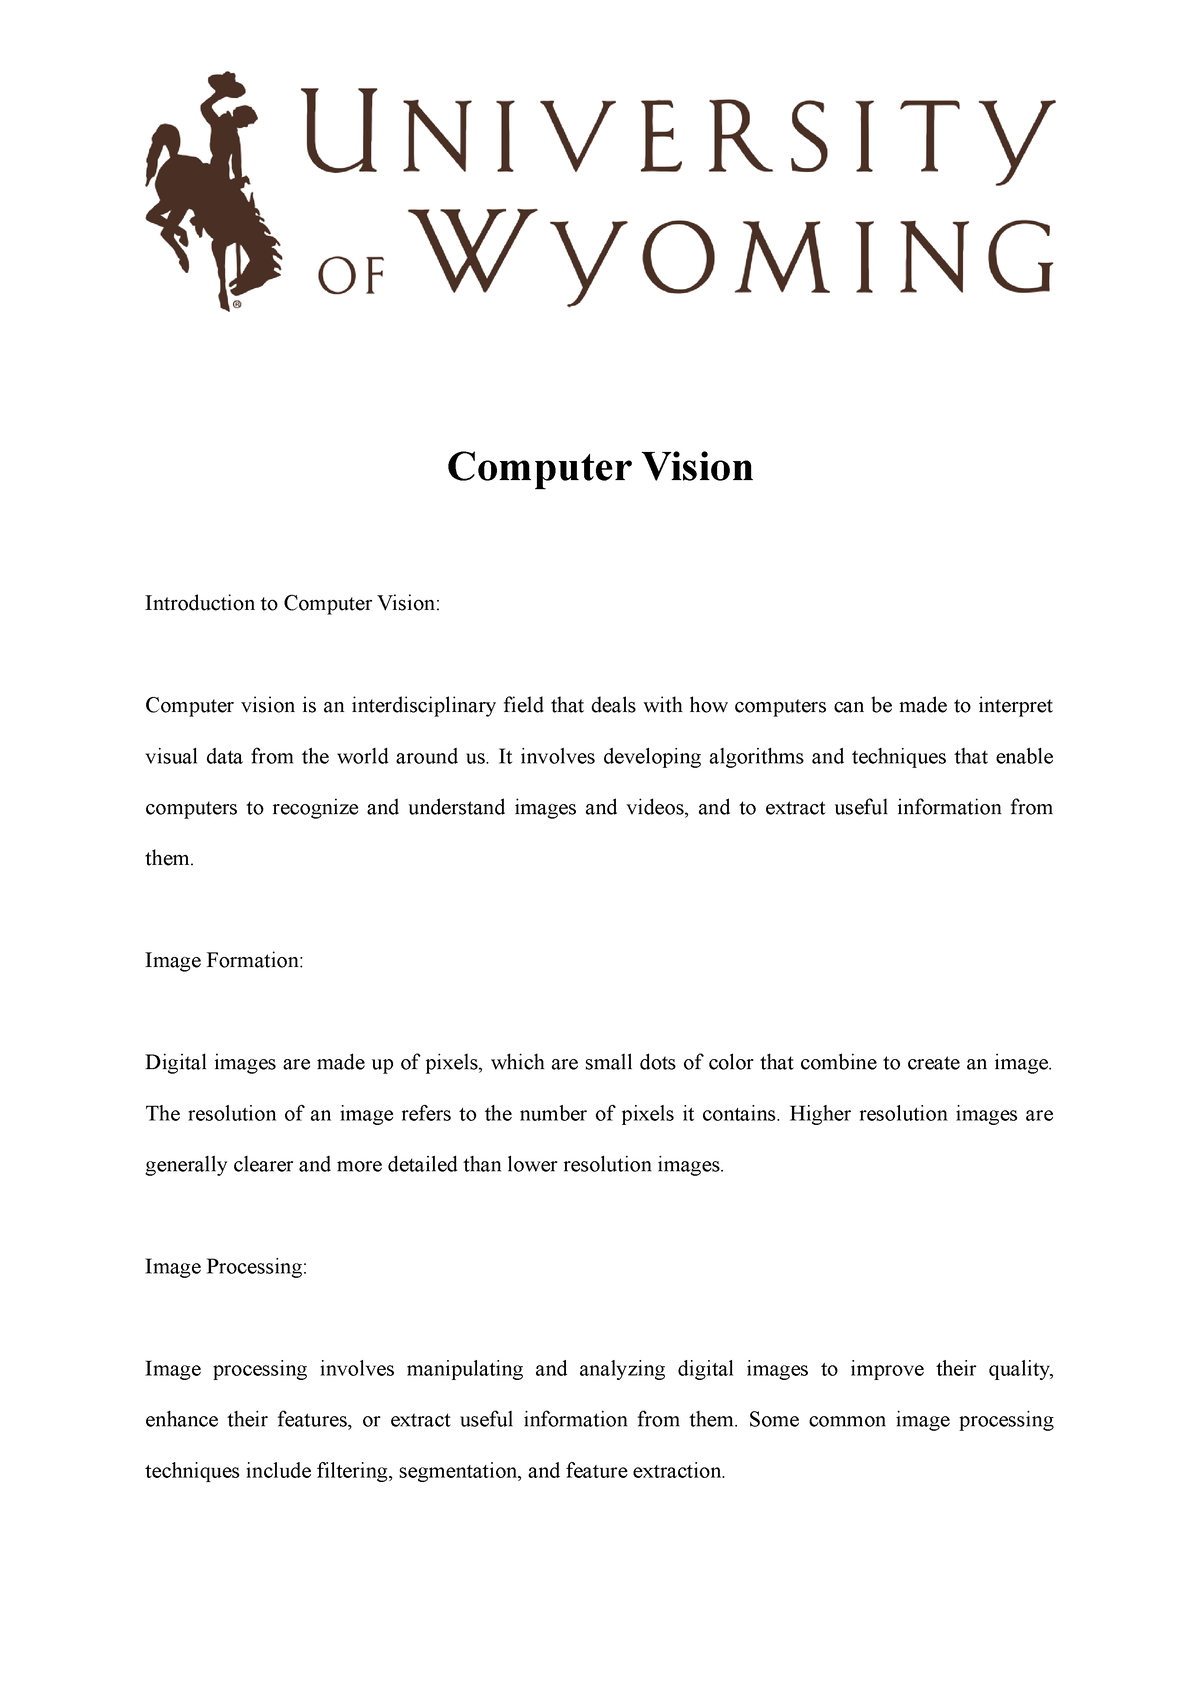 phd thesis on computer vision